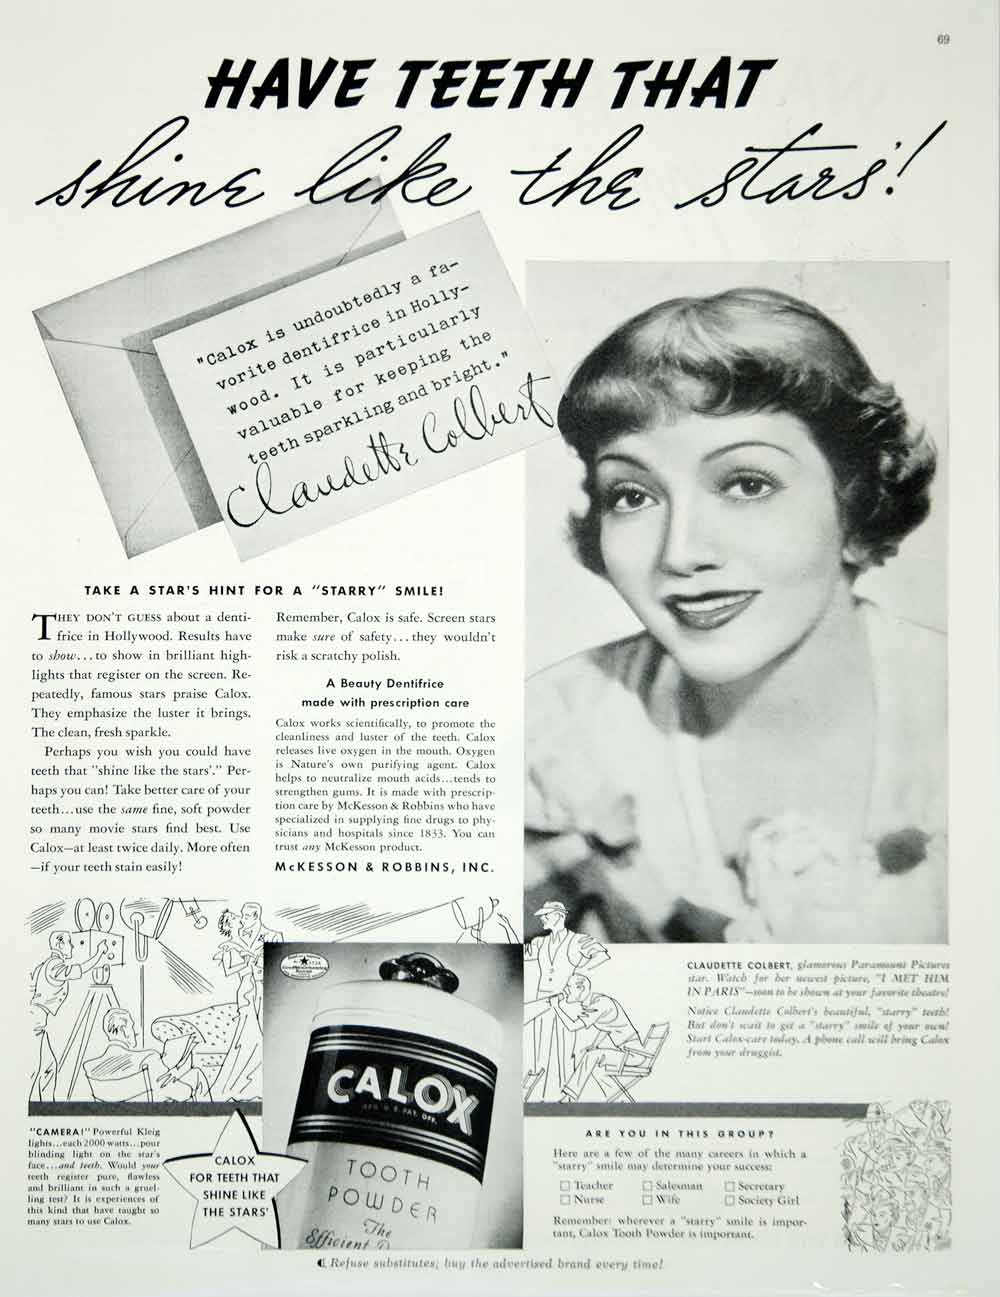 1937 Ad Vintage Calox Tooth Powder Toothpaste Dental Care Claudette Colbert Star